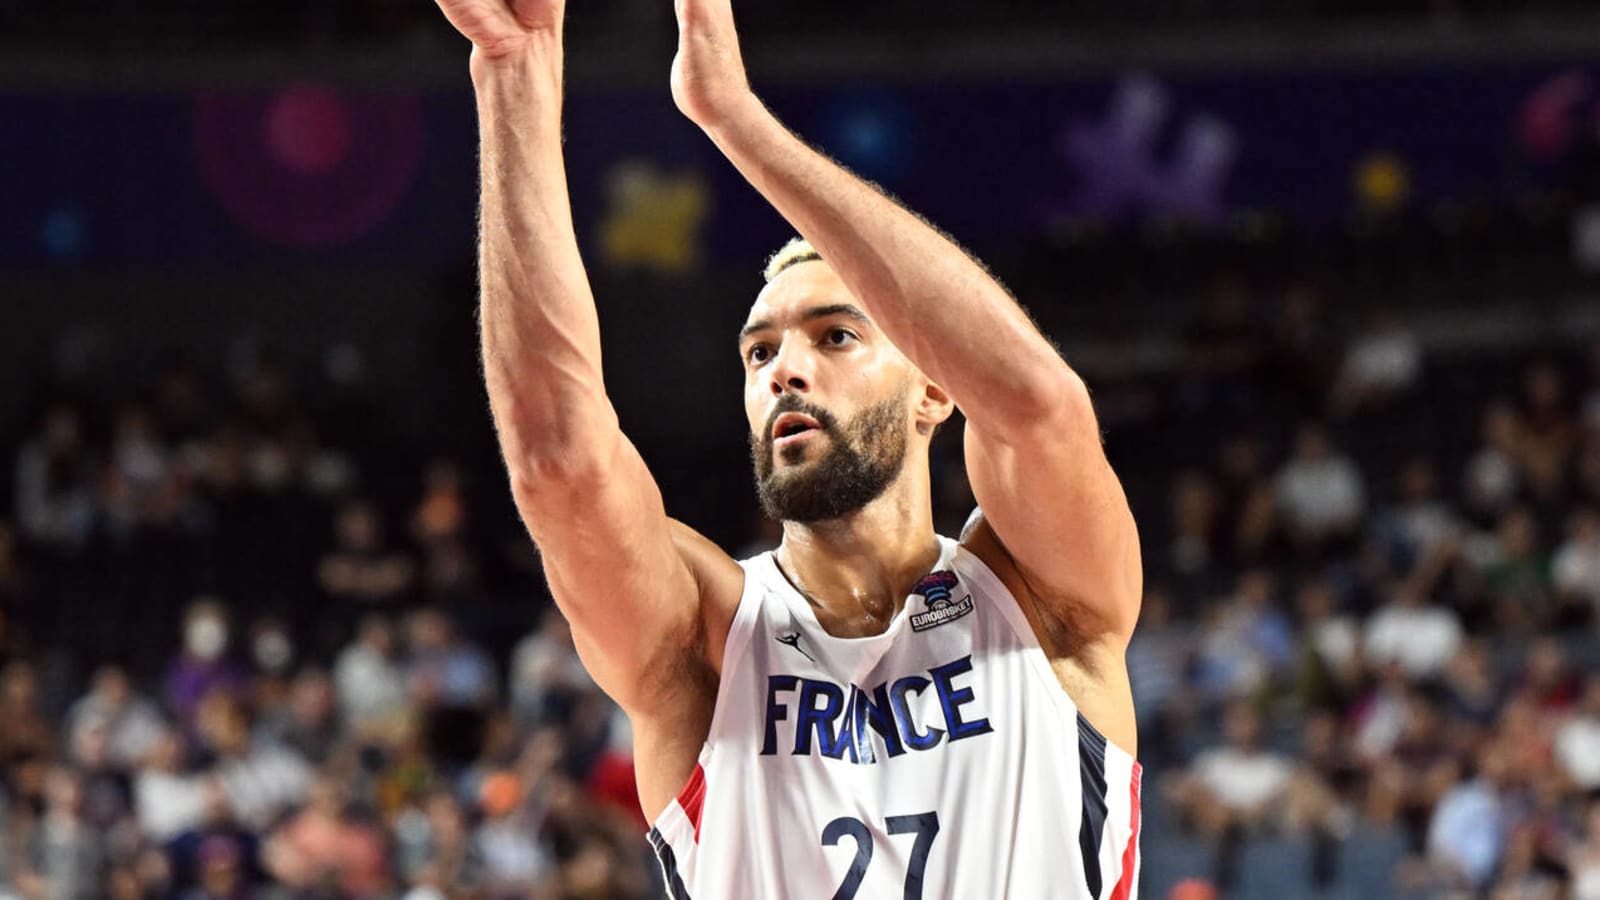 Rudy Gobert drills back-to-back threes in EuroBasket warm-ups